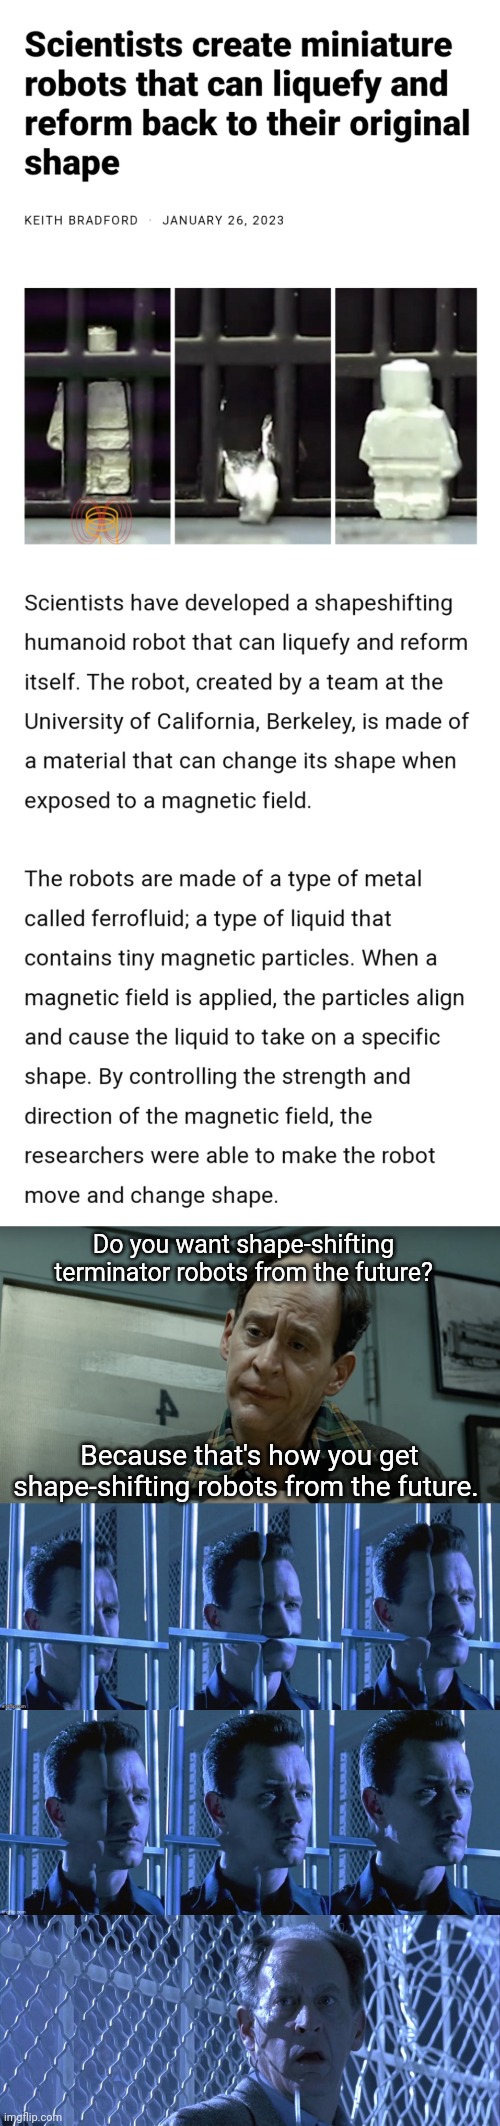 This Shape-Shifting Robot Can Liquefy Itself and Reform